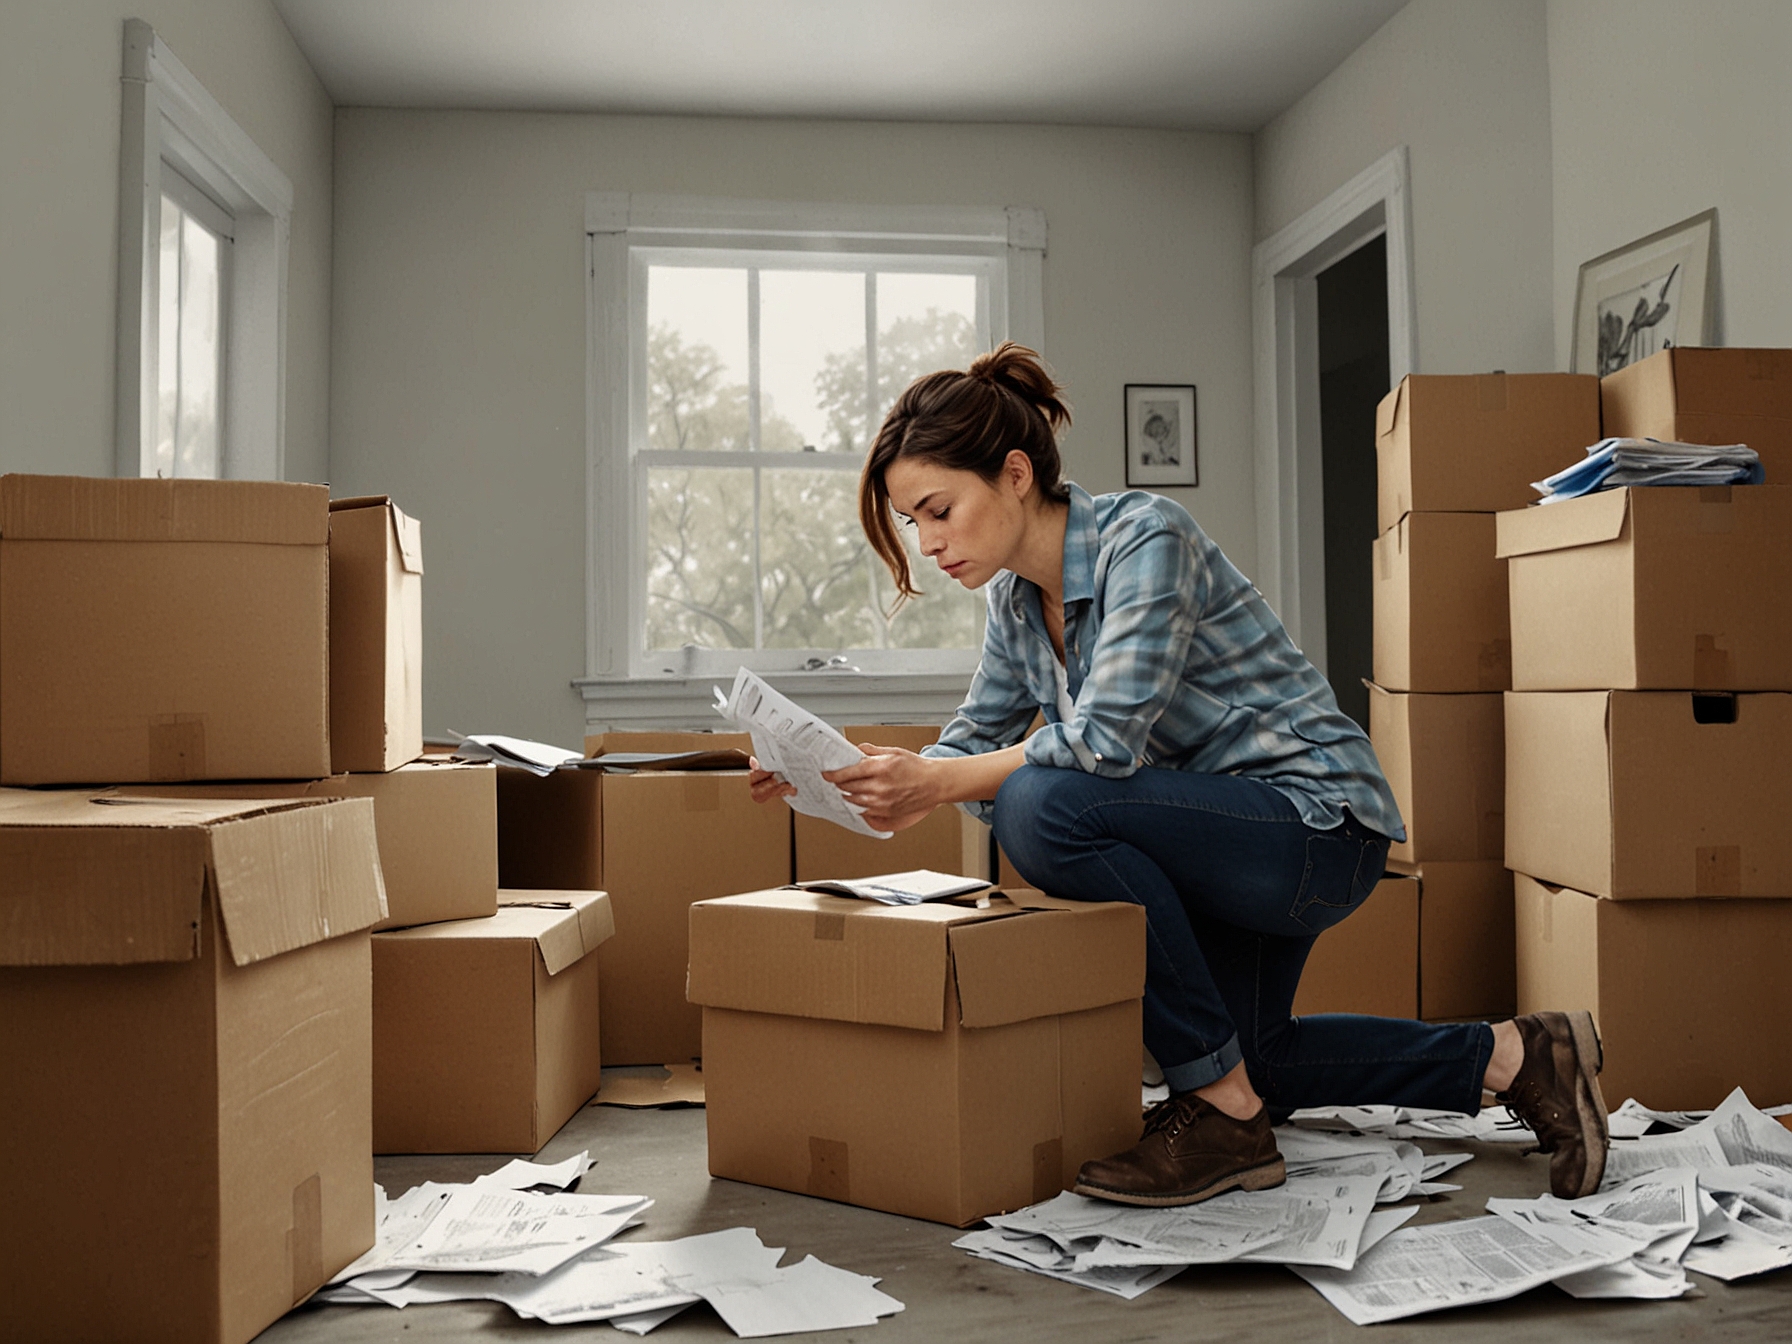 Frustrated renters, like Julie Beaulieu, filling out rental applications surrounded by moving boxes. This image captures the challenges and uncertainties faced by many looking for housing.